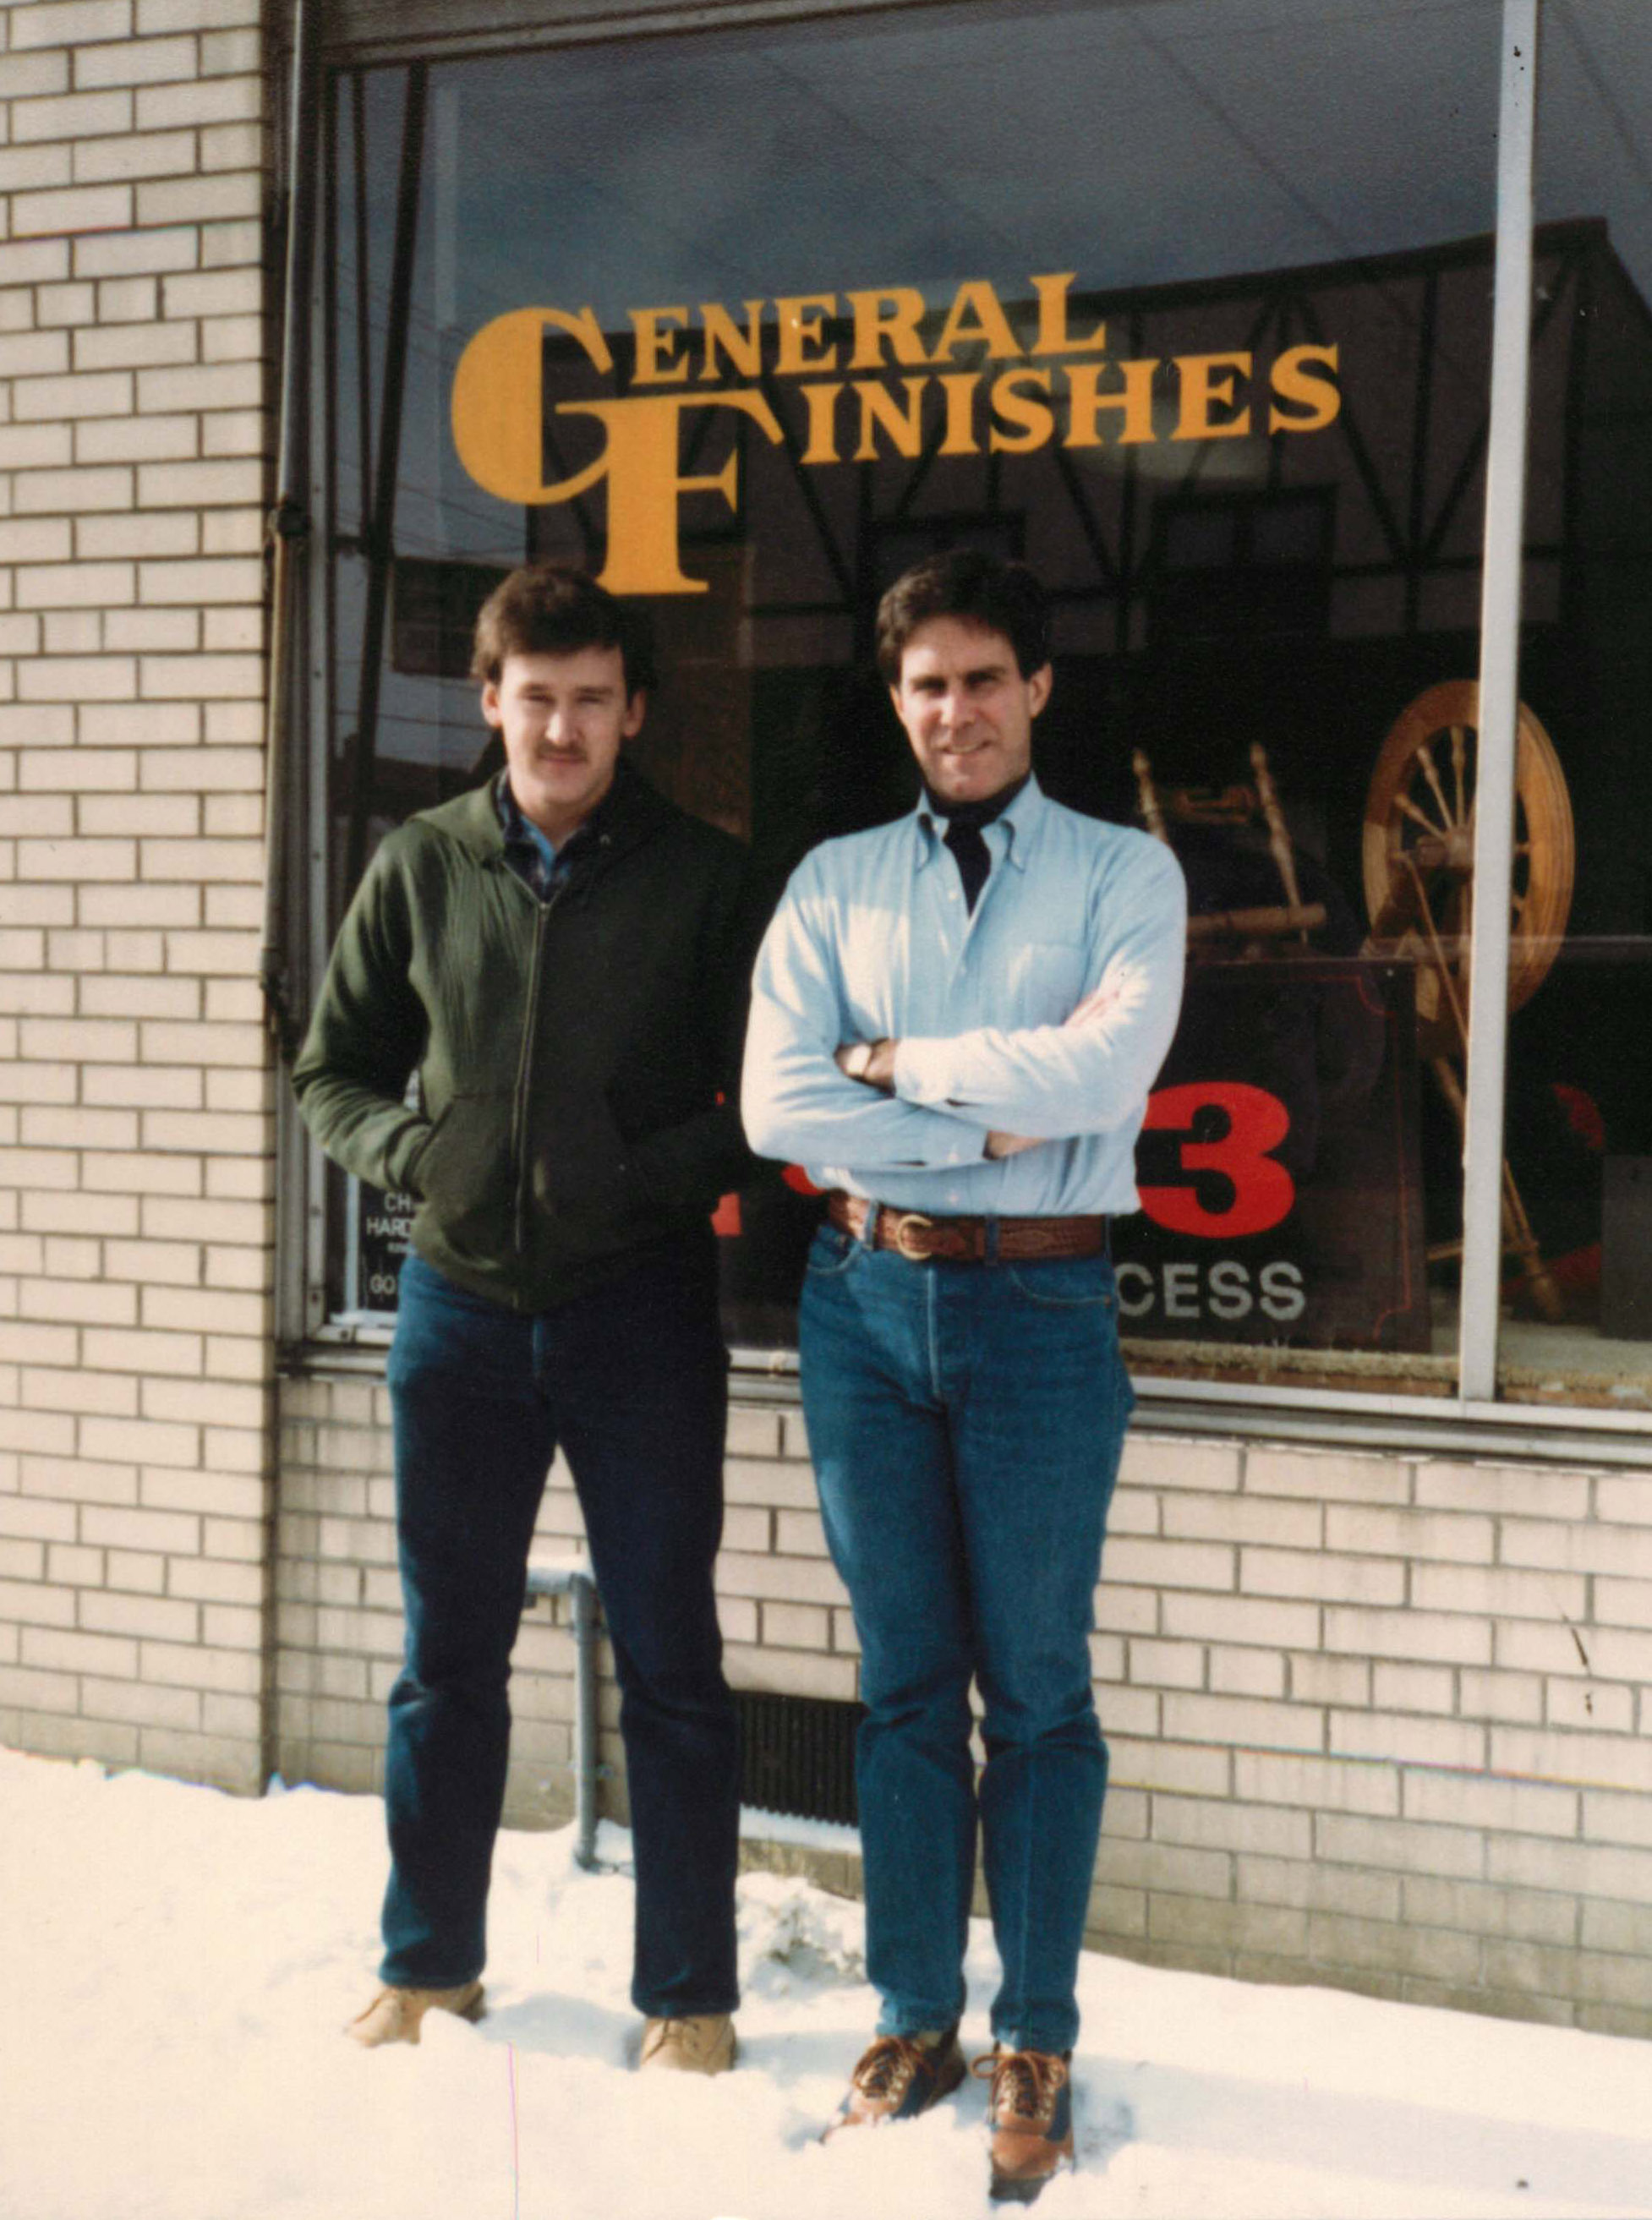 General Finishes West Allis, WI 1985